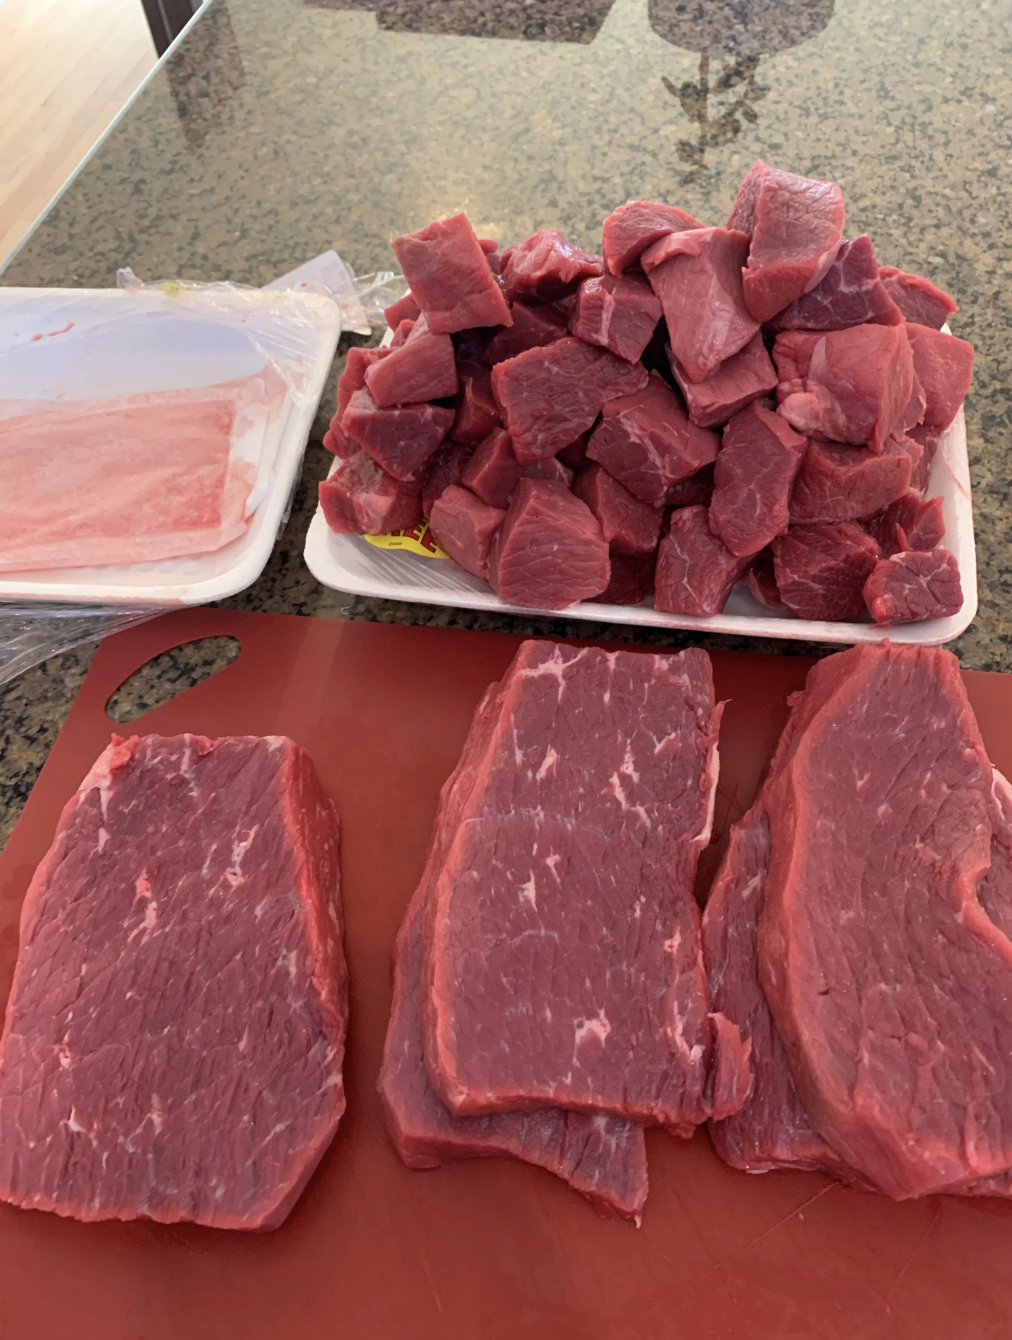 Several pieces of meat cut into cubes and strips of varying size